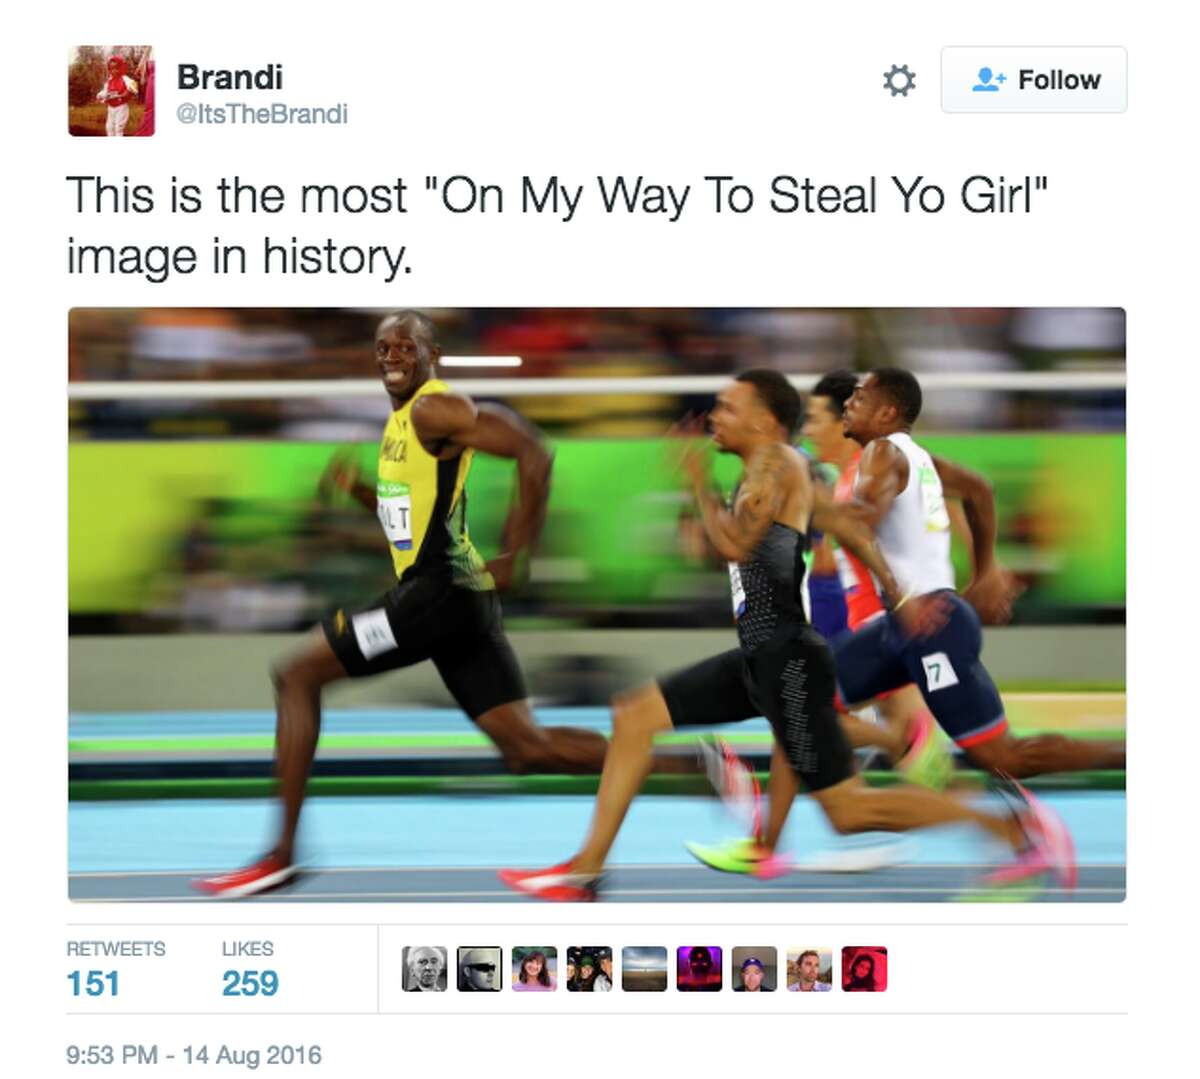 An image of a Usain Bolt meme that emerged after his dominant day at the Rio Olympics.